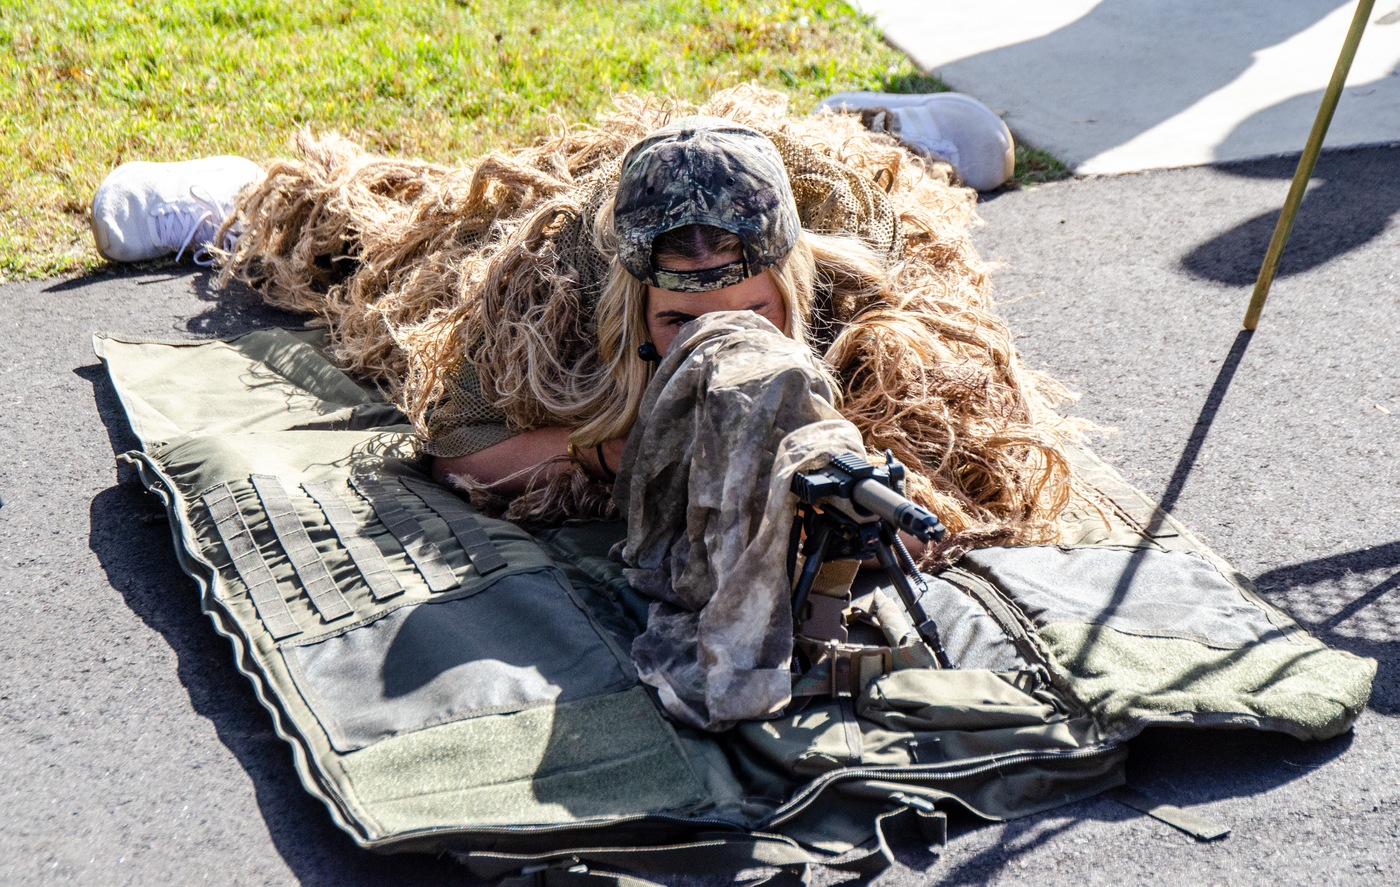 Christina Quaine, a chief information security officer, dons sniper gear during a SWAT demonstration at the CISO Academy in Charlotte, North Carolina. The FBI’s Cyber Division has held its Chief Information Security Officer (CISO) Academy since 2016. 